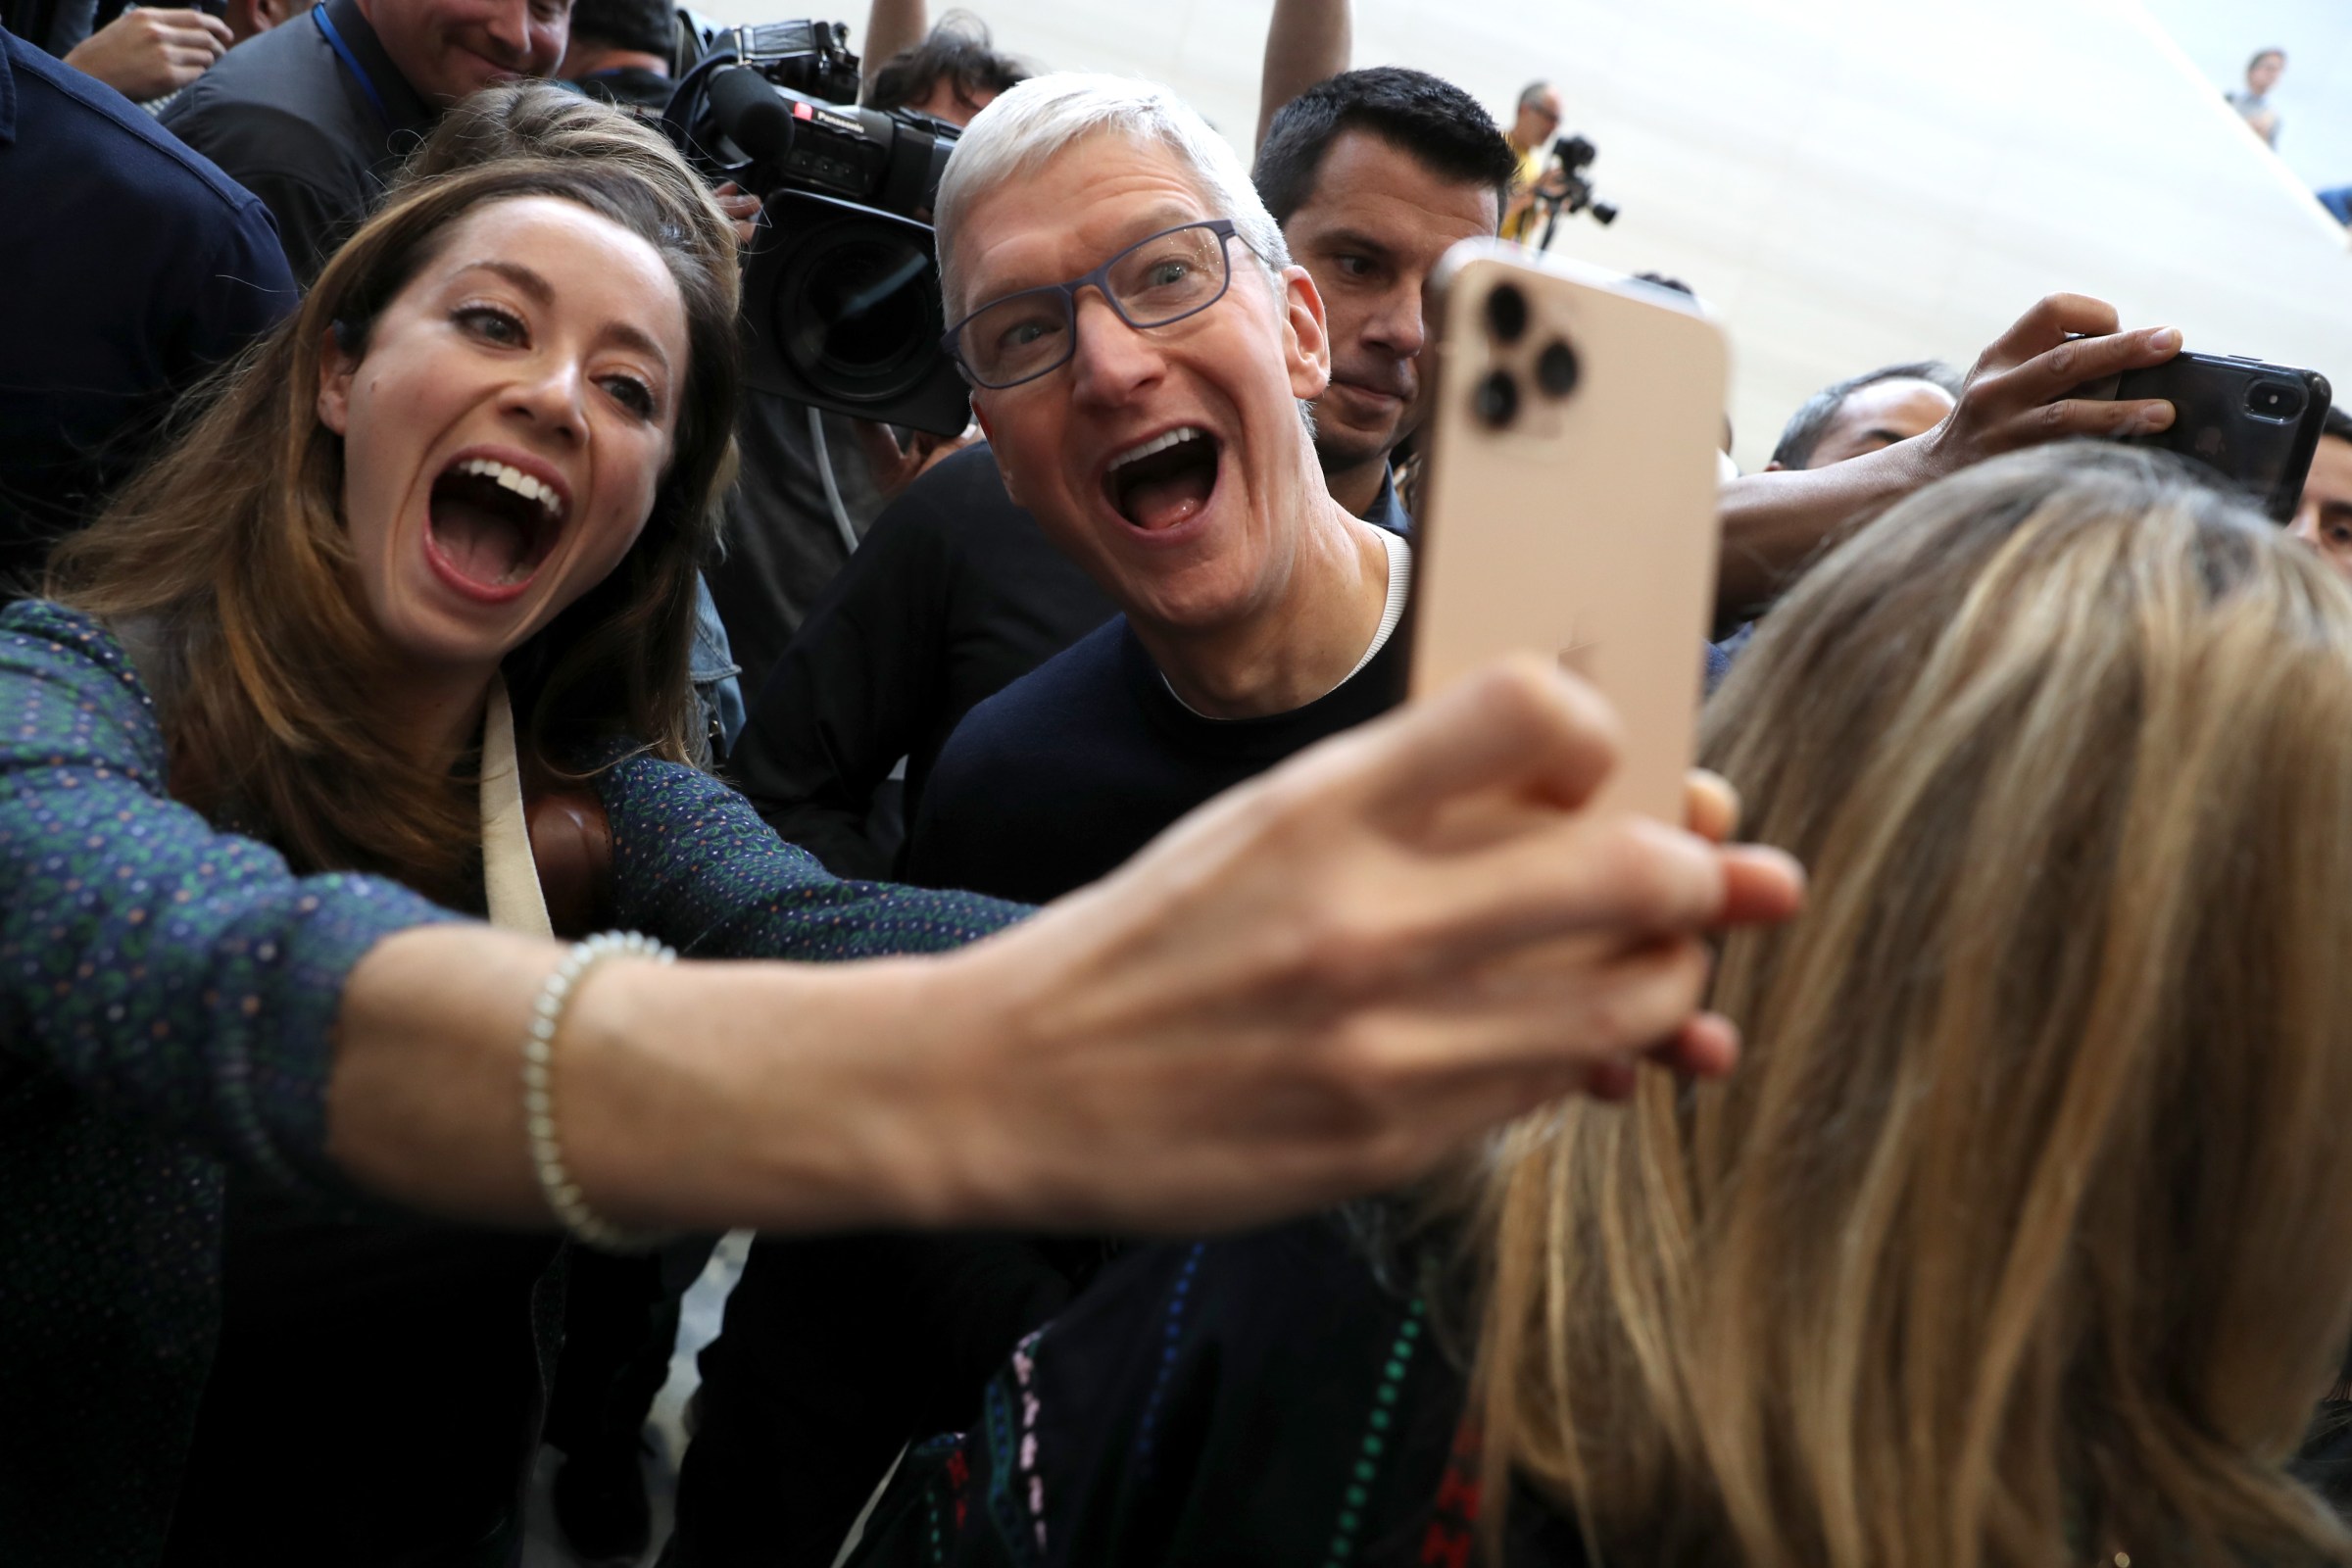 Apple is facing a new antitrust lawsuit that could dethrone the iPhone